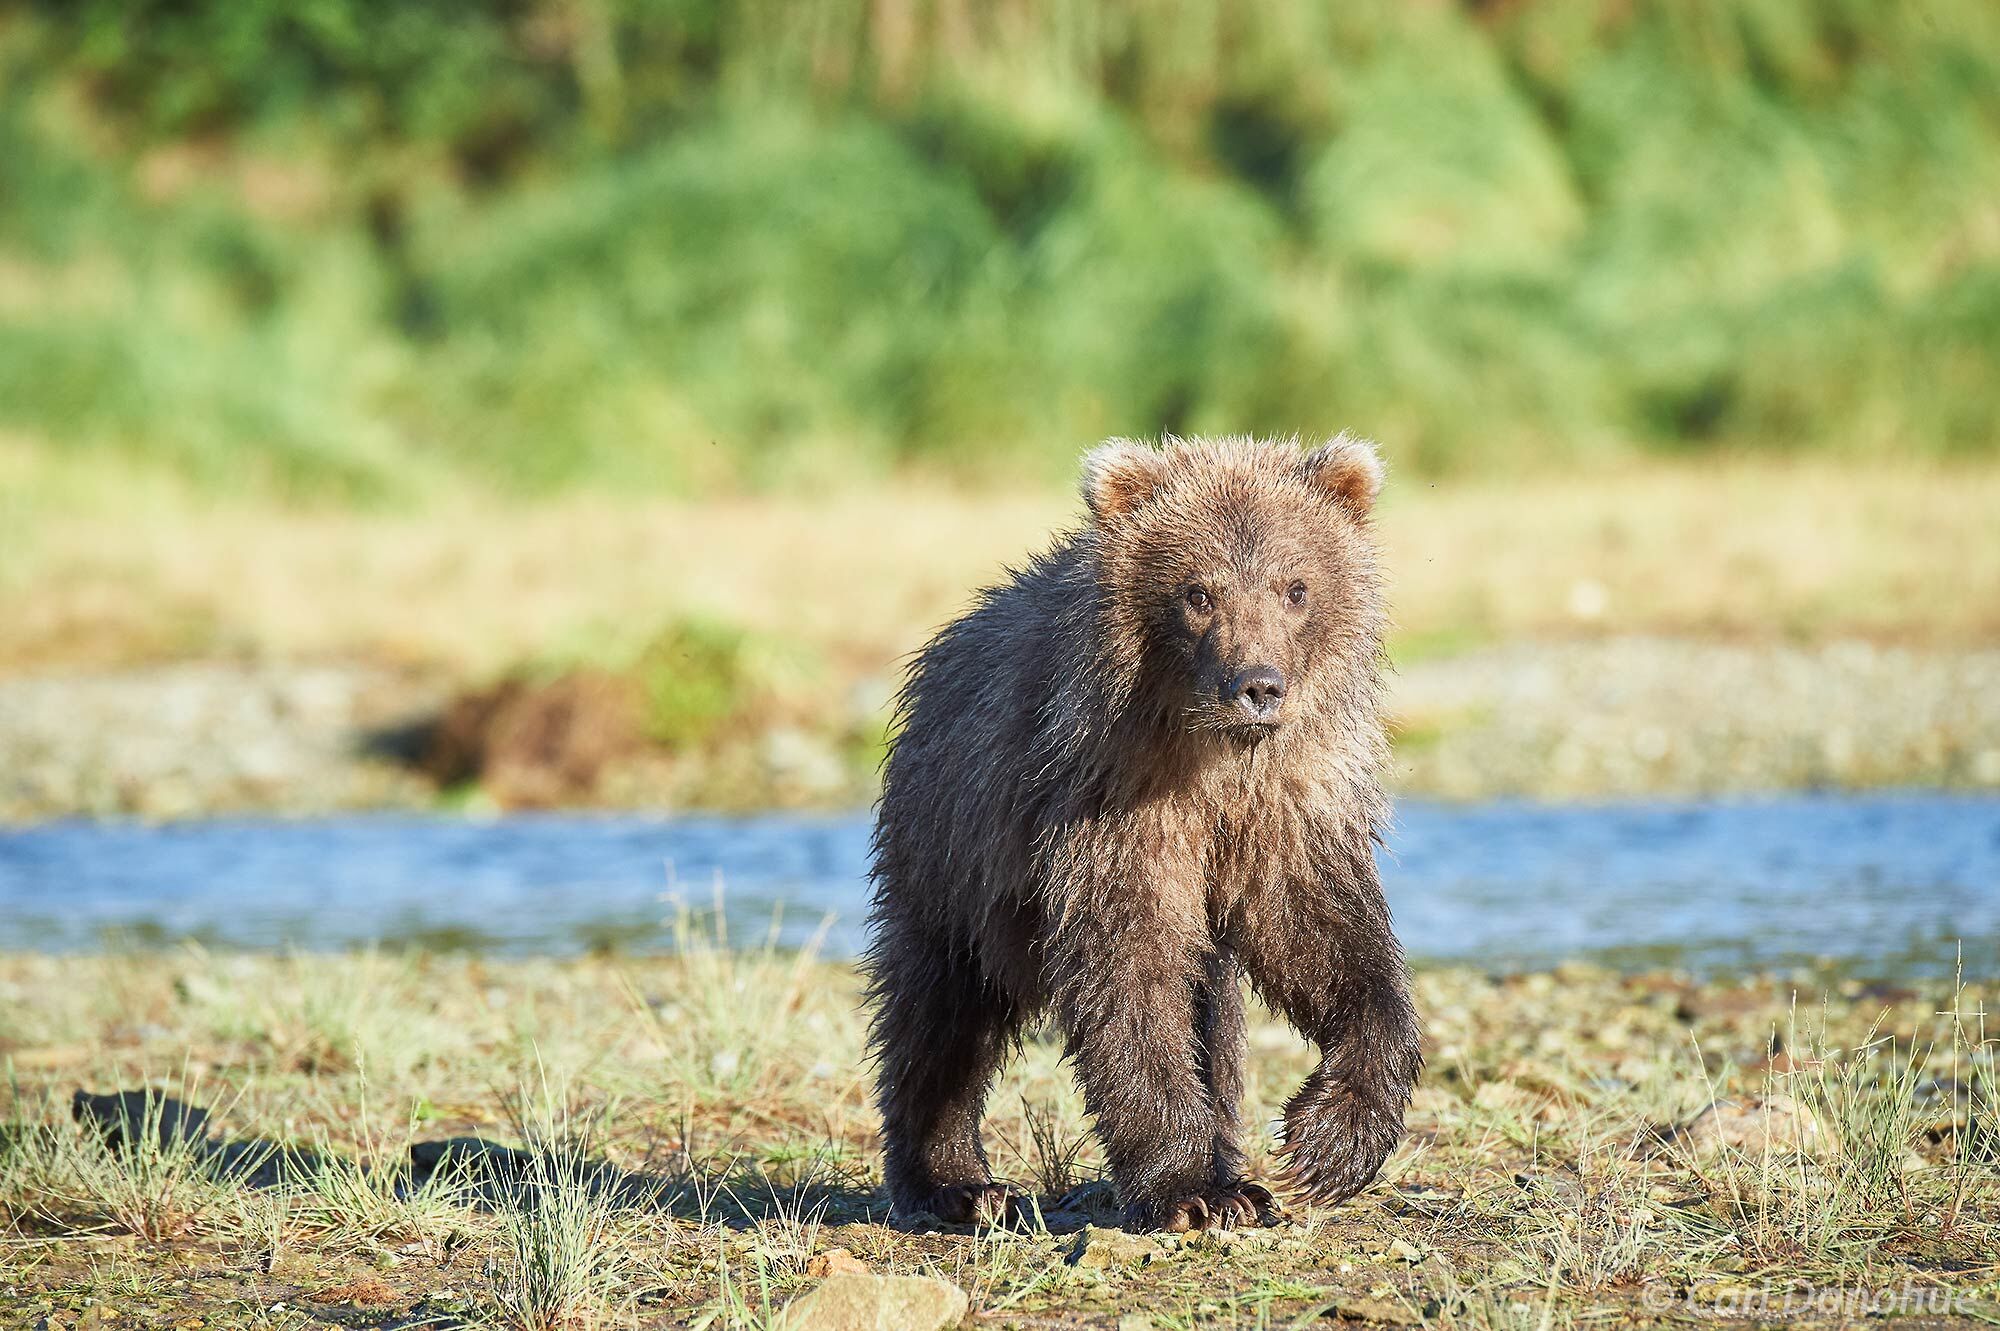 What’s cuter than a baby bear? Not too much. This gorgeously cute young grizzly bear cub wandered by as his mother walked the...